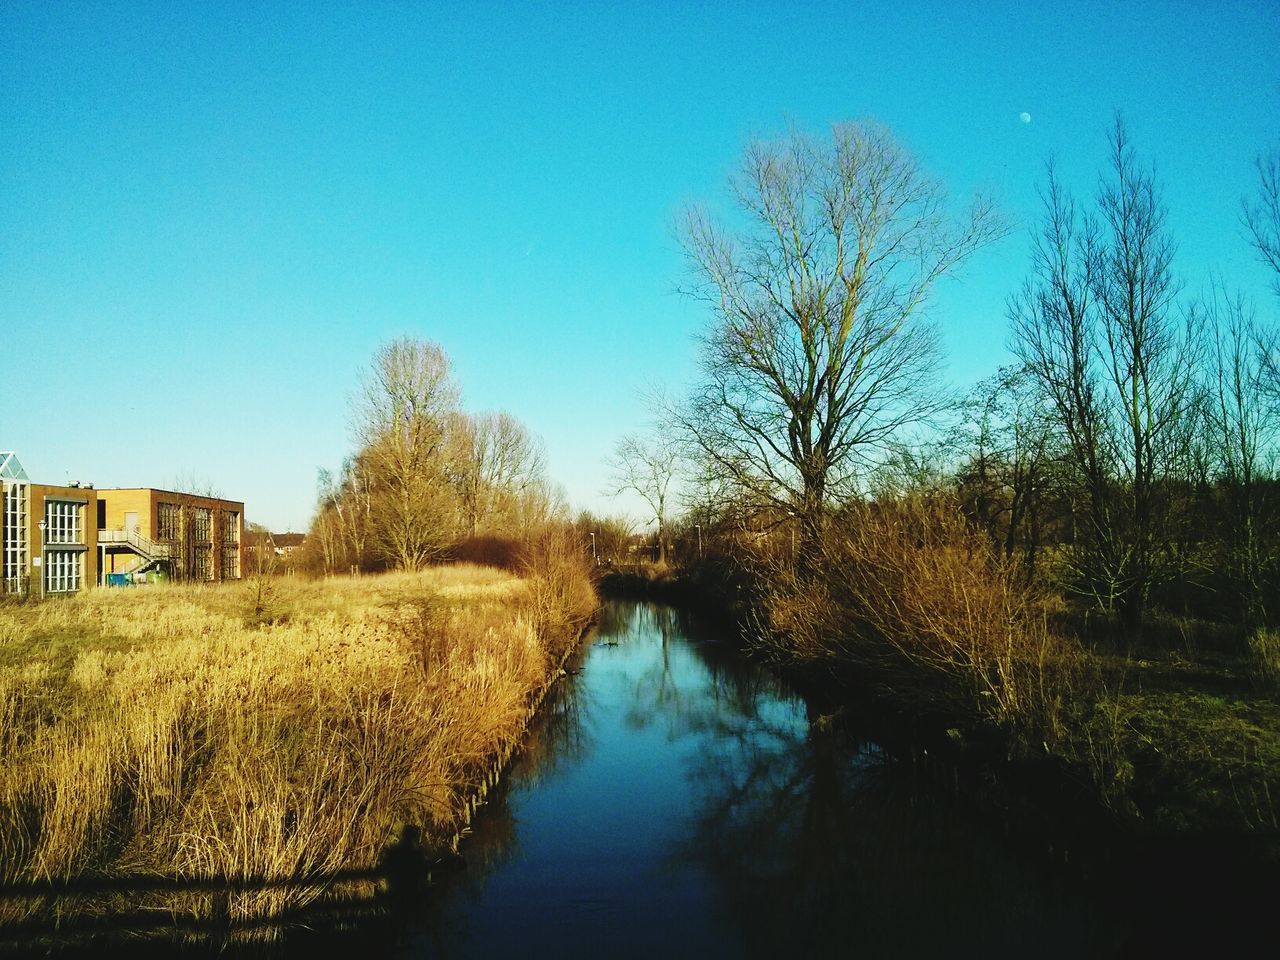 Stream with houses against clear blue sky